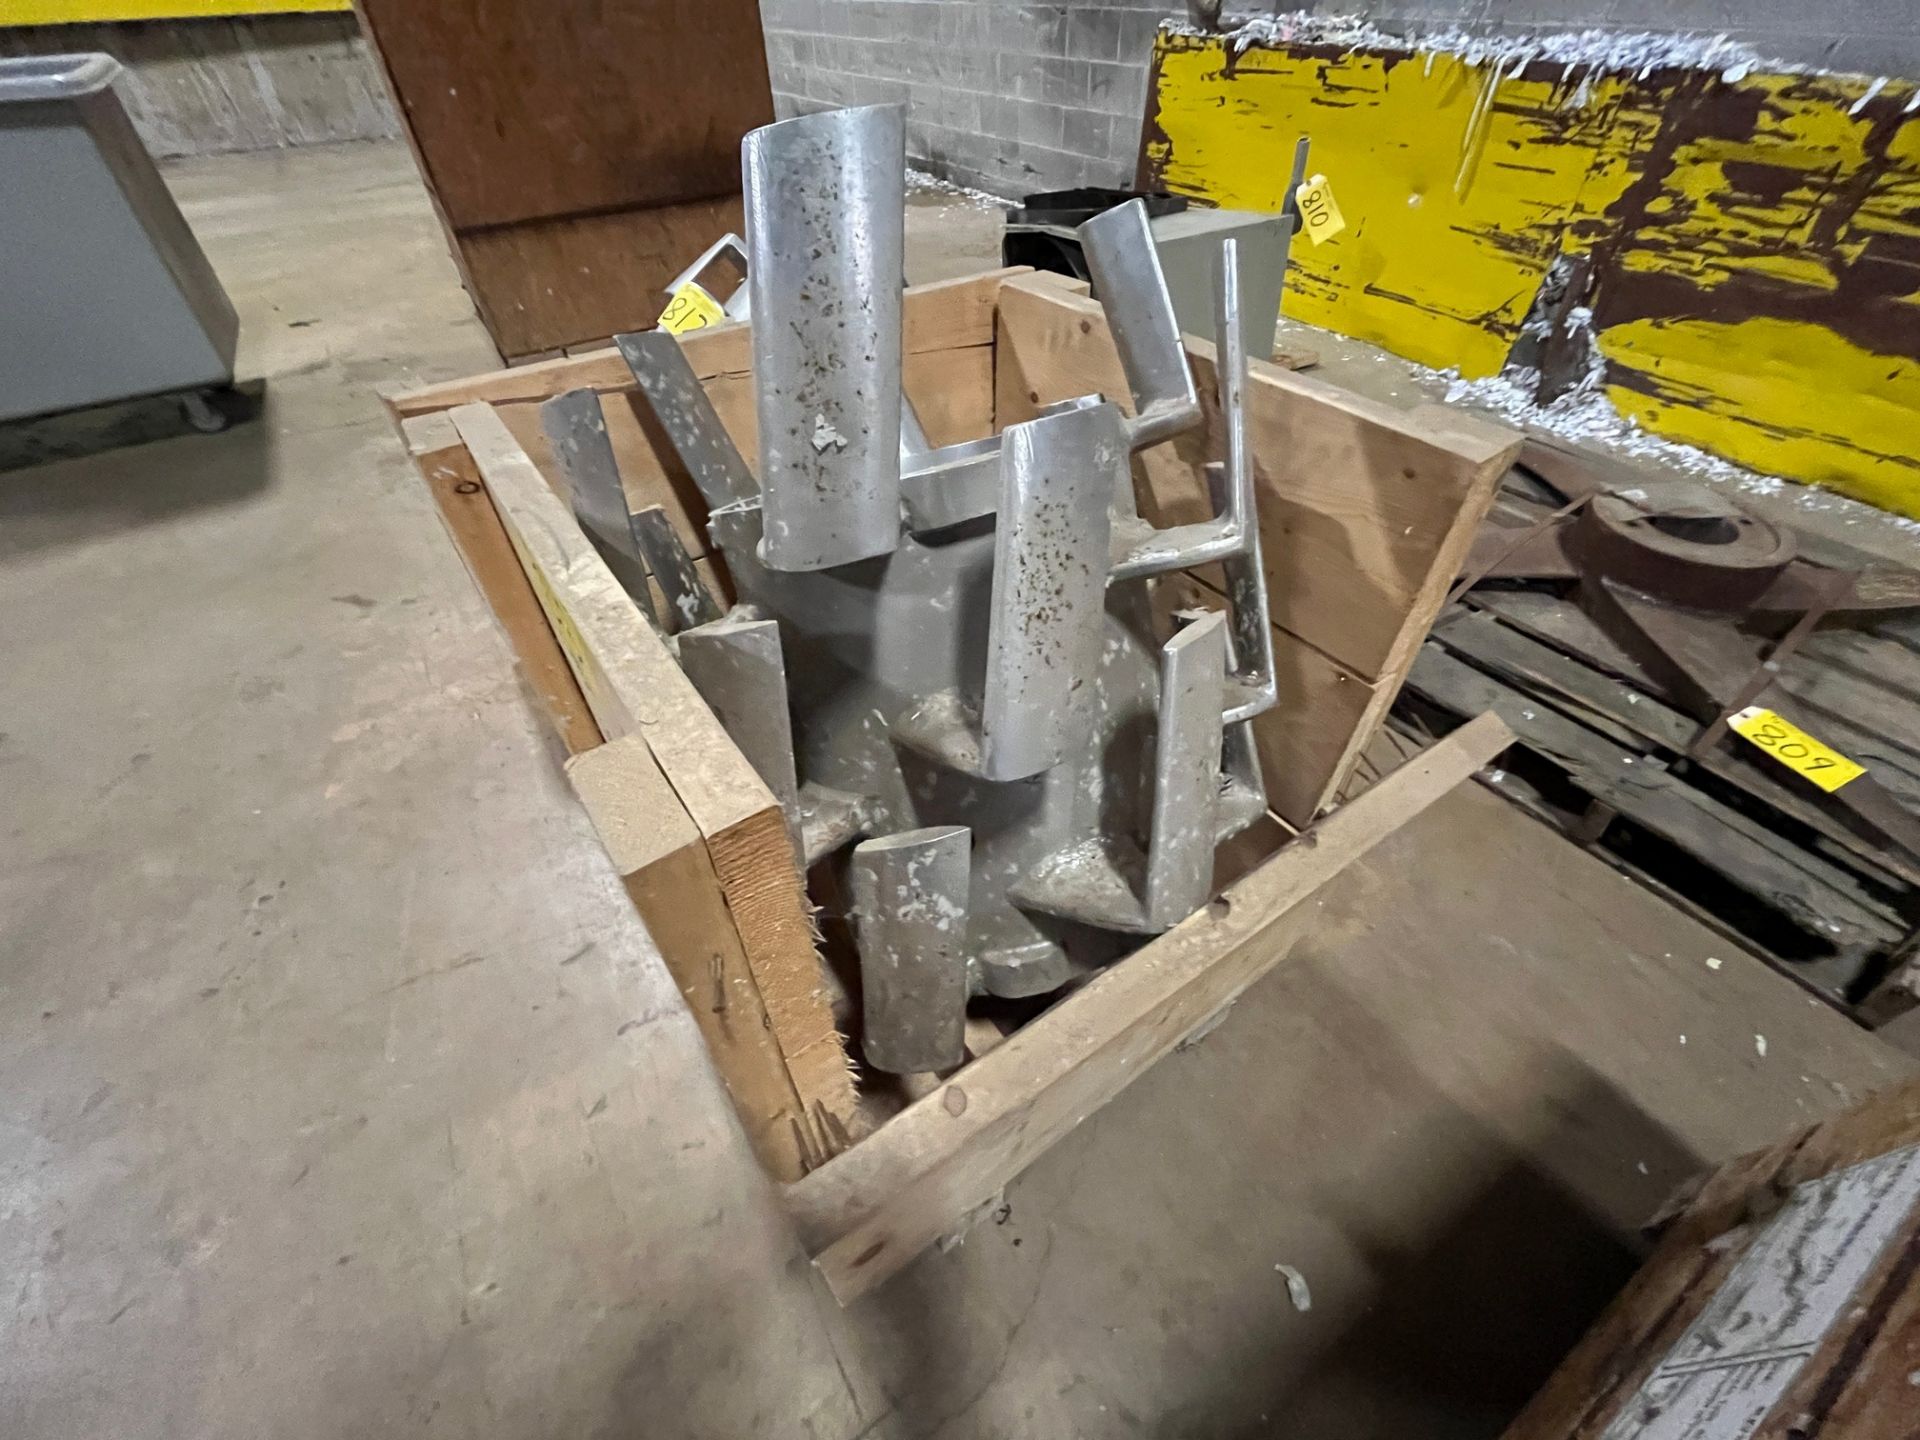 STAINLESS STEEL ROTARY ATTACHMENT IN CRATE (DEINKING BUILDING) - Image 2 of 2